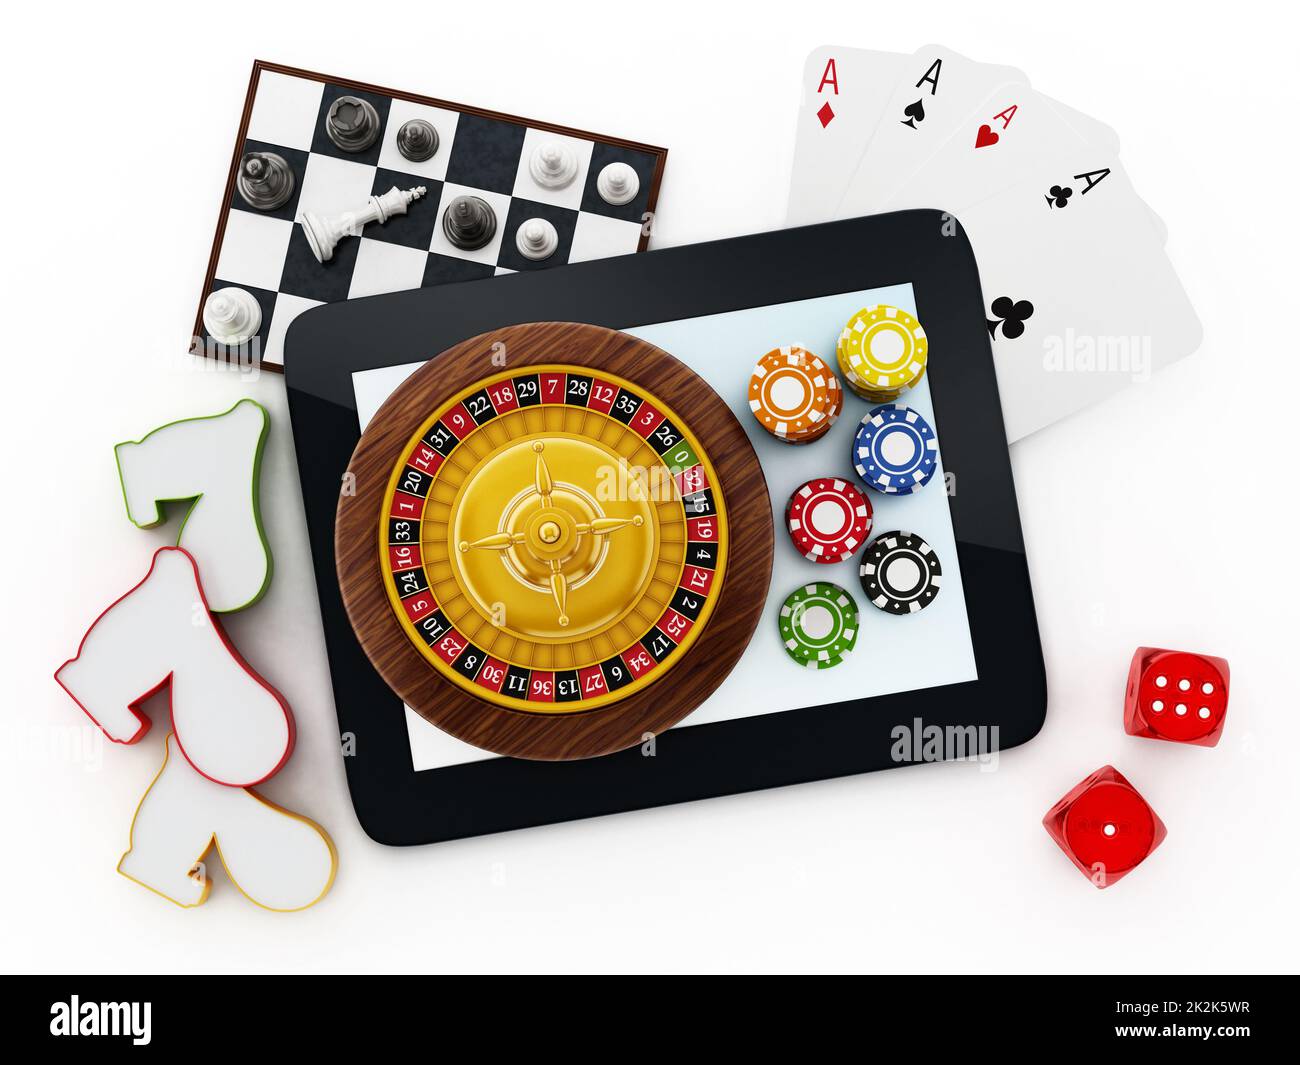 Tablet computer, playing cards, roulette,chips, dice. Stock Photo